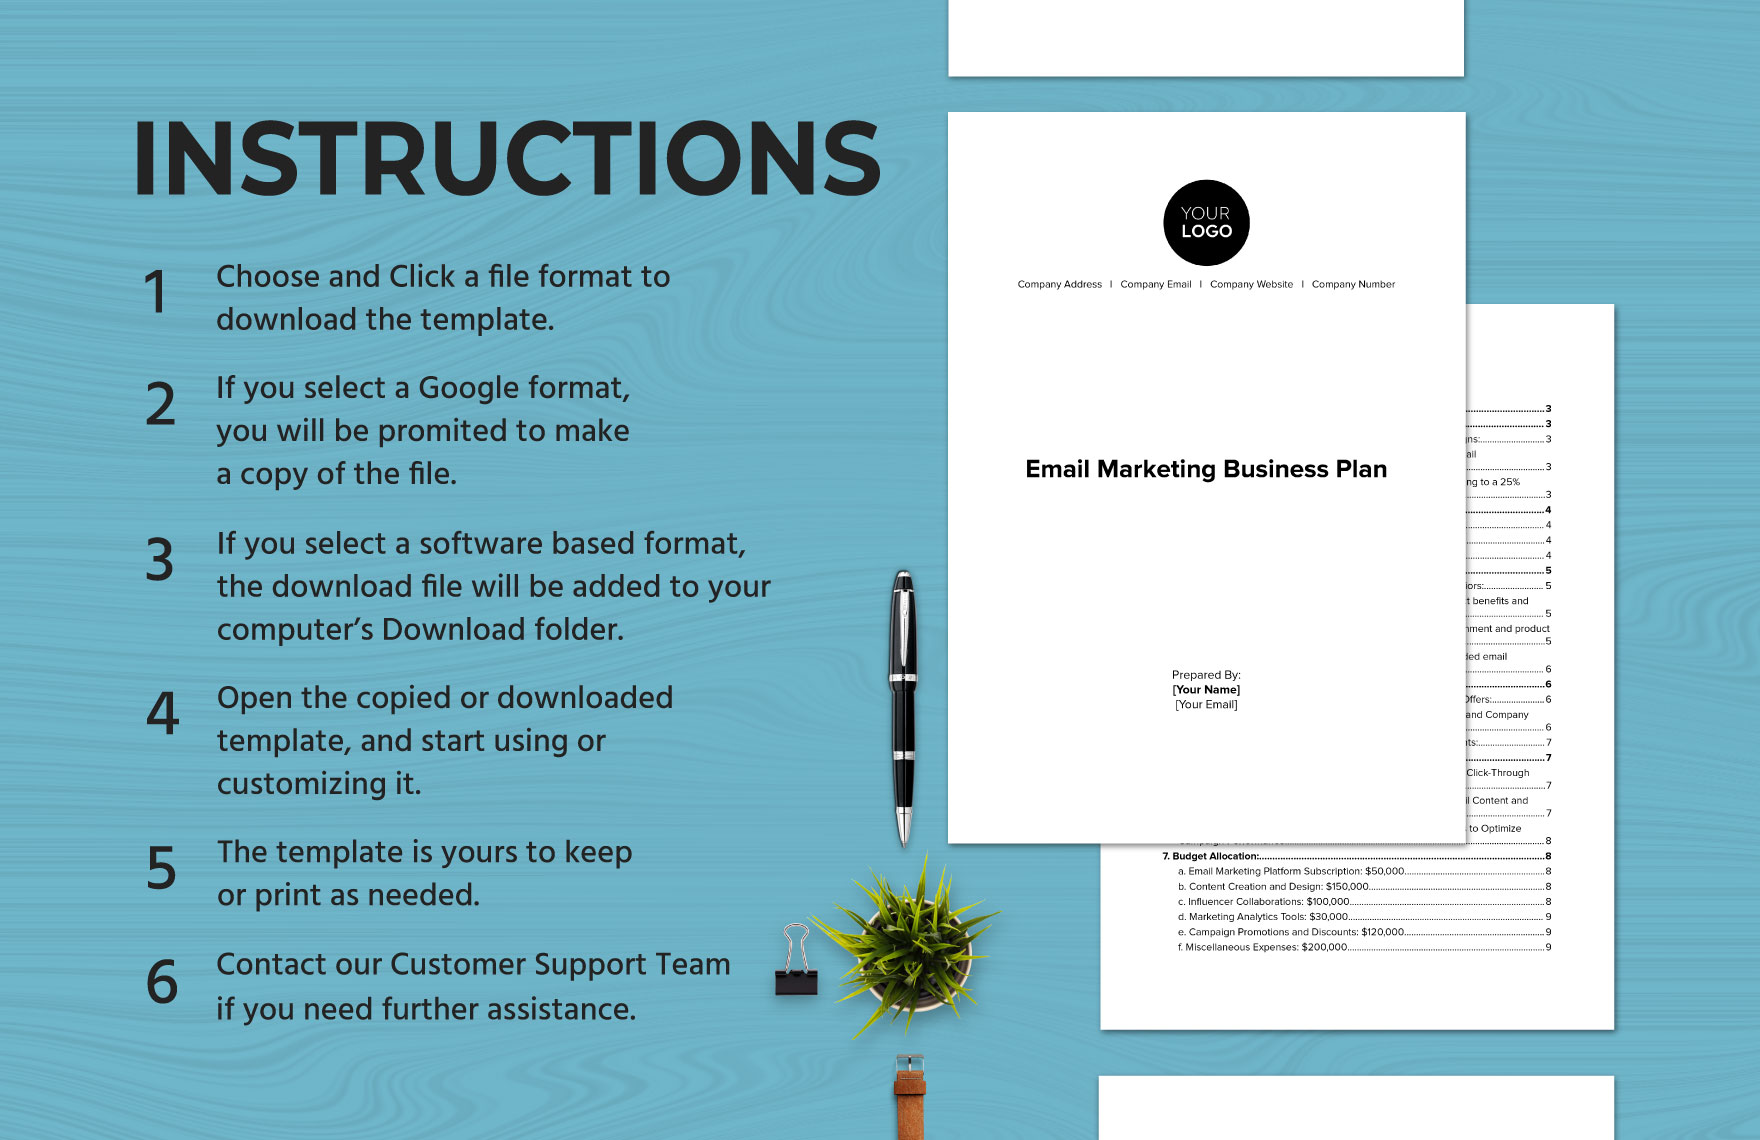 Email Marketing Business Plan Template